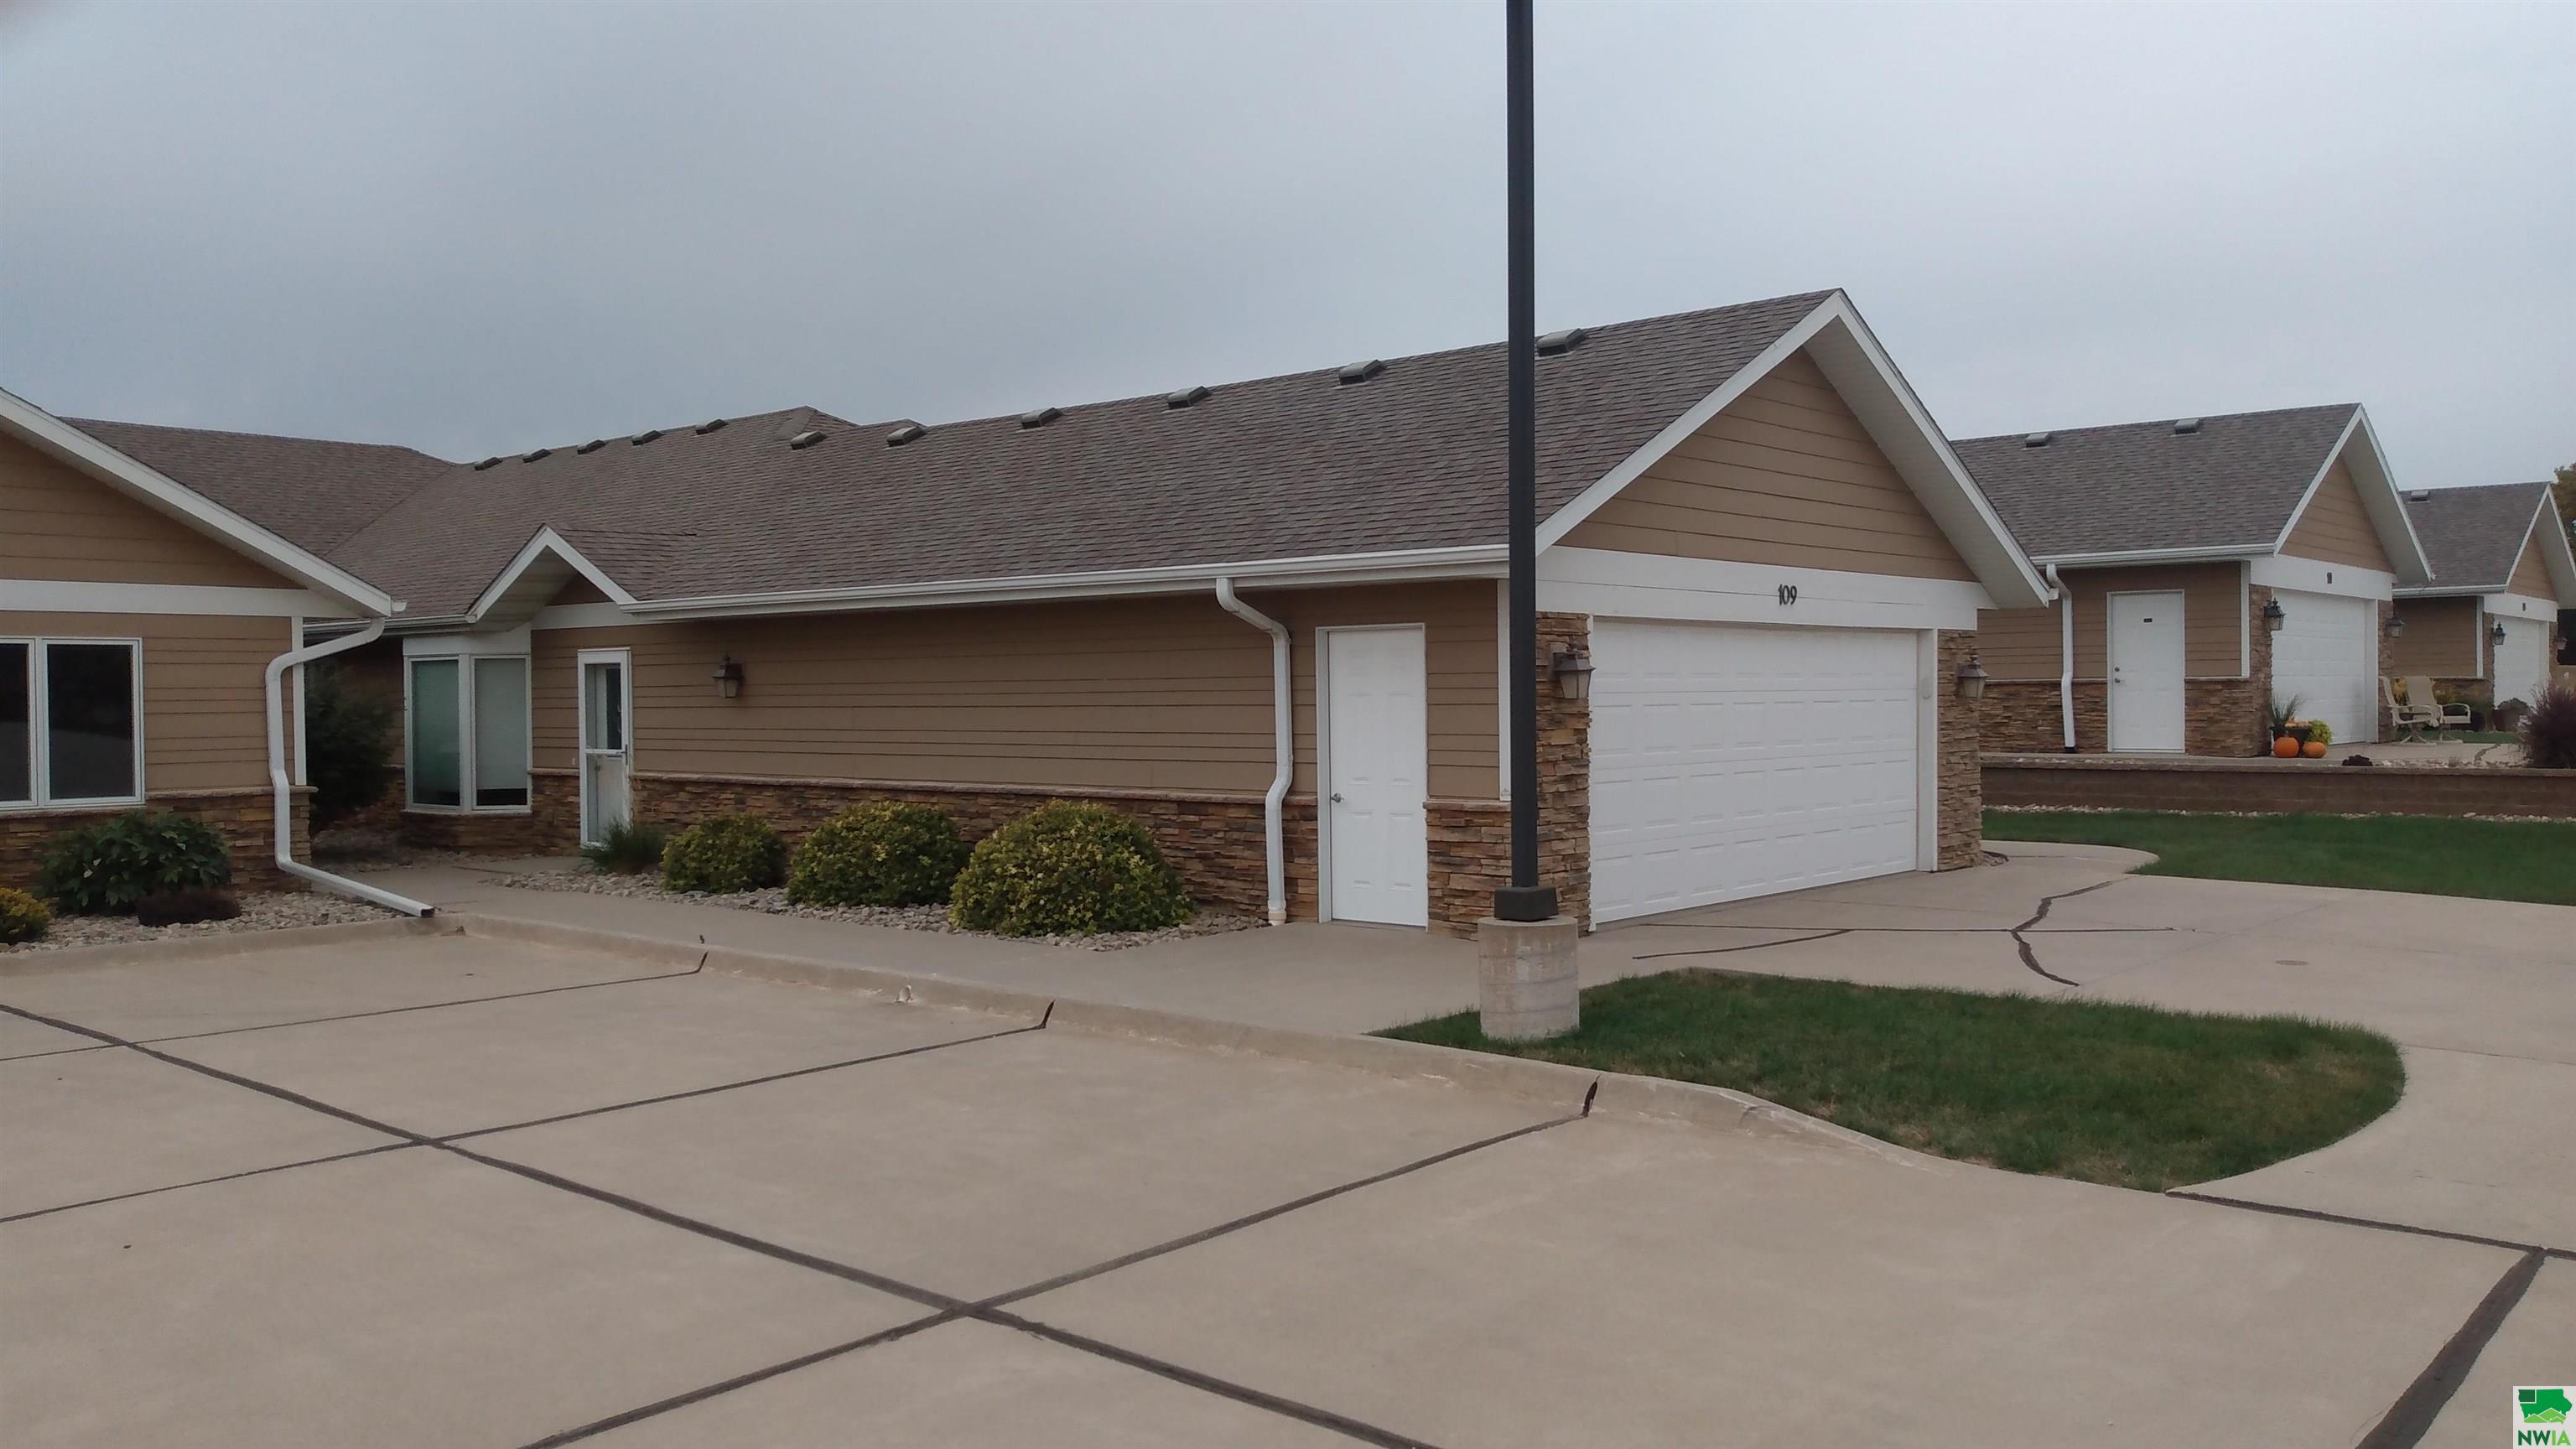 2225 Riviera Road						  						 , Sioux Center						 , IA						  51250						  